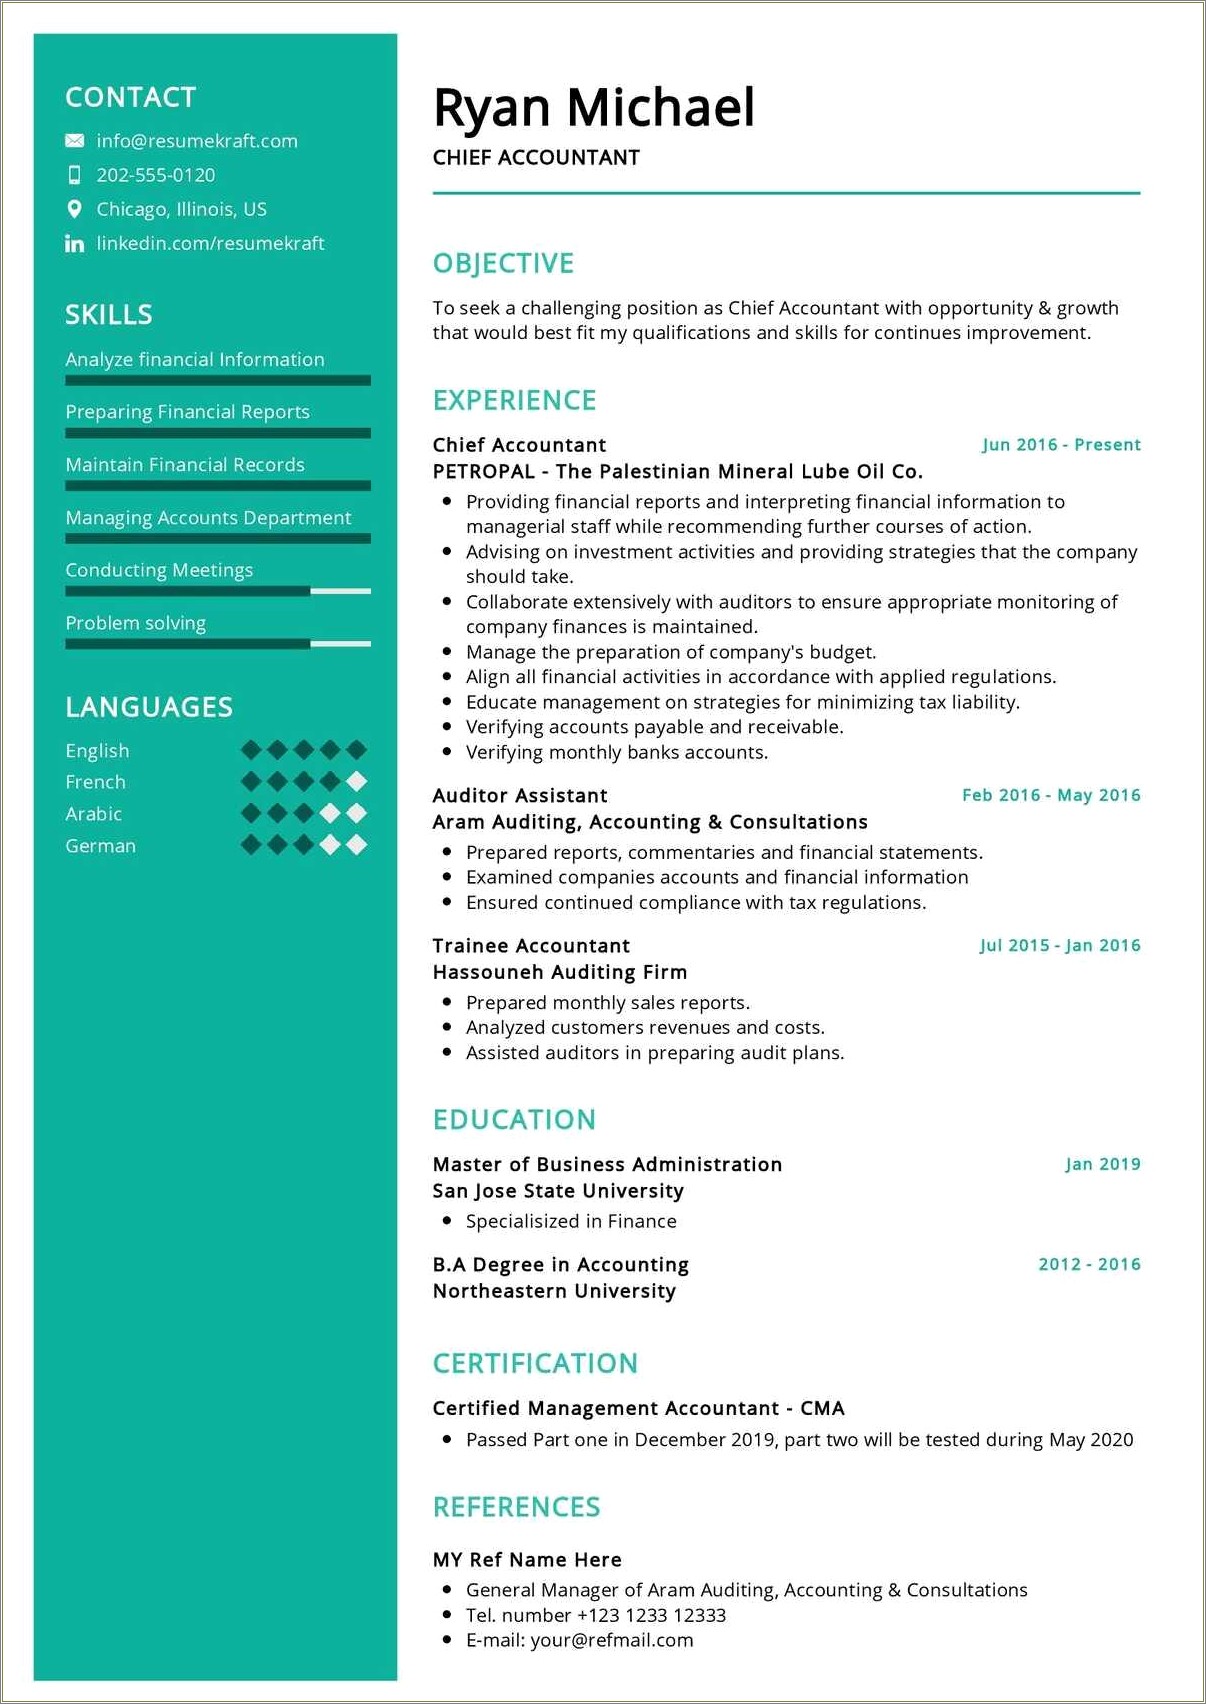 Resume From Working At Accounting Firms